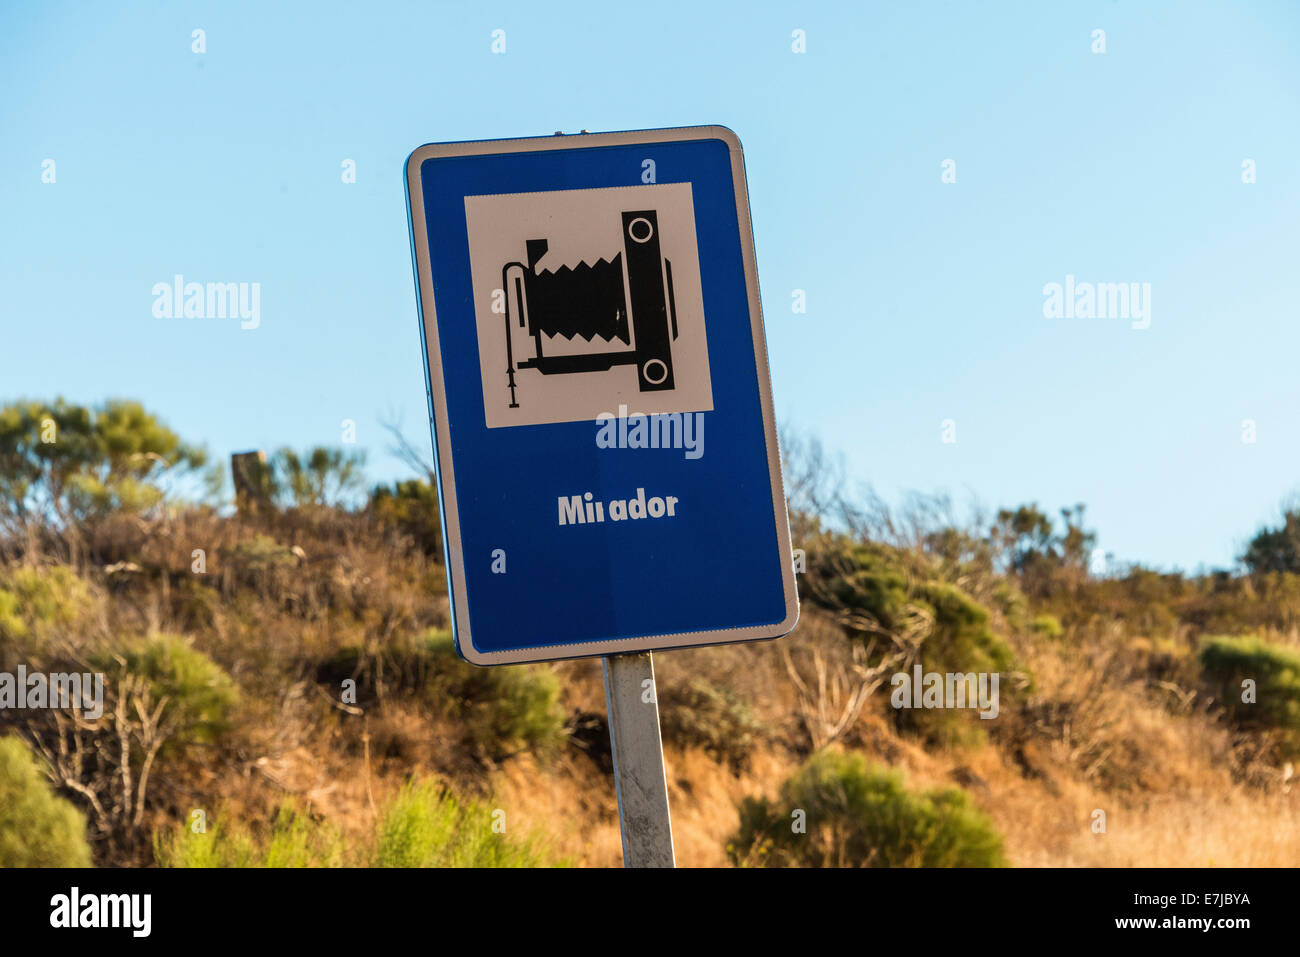 Sign &quot;Mirador&quot;, Spanish for viewpoint, Tenerife, Canary Islands, Spain Stock Photo